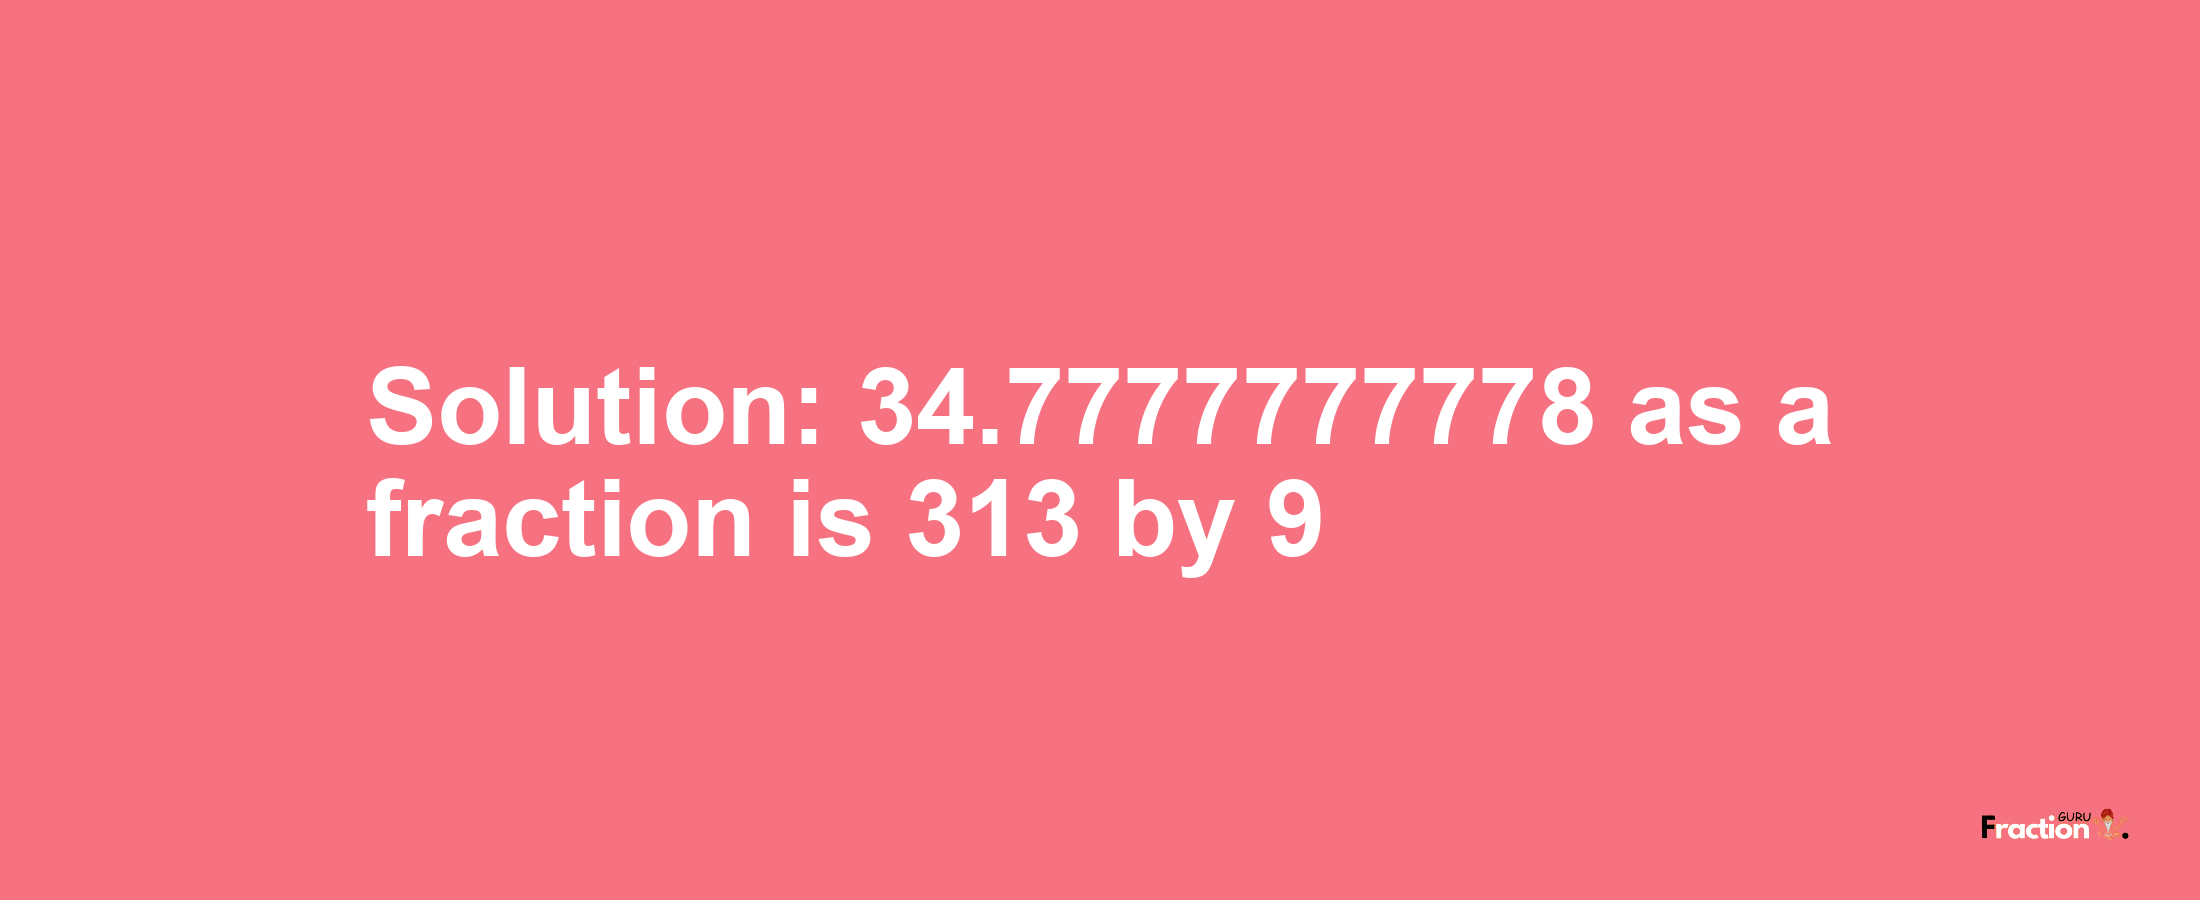 Solution:34.7777777778 as a fraction is 313/9